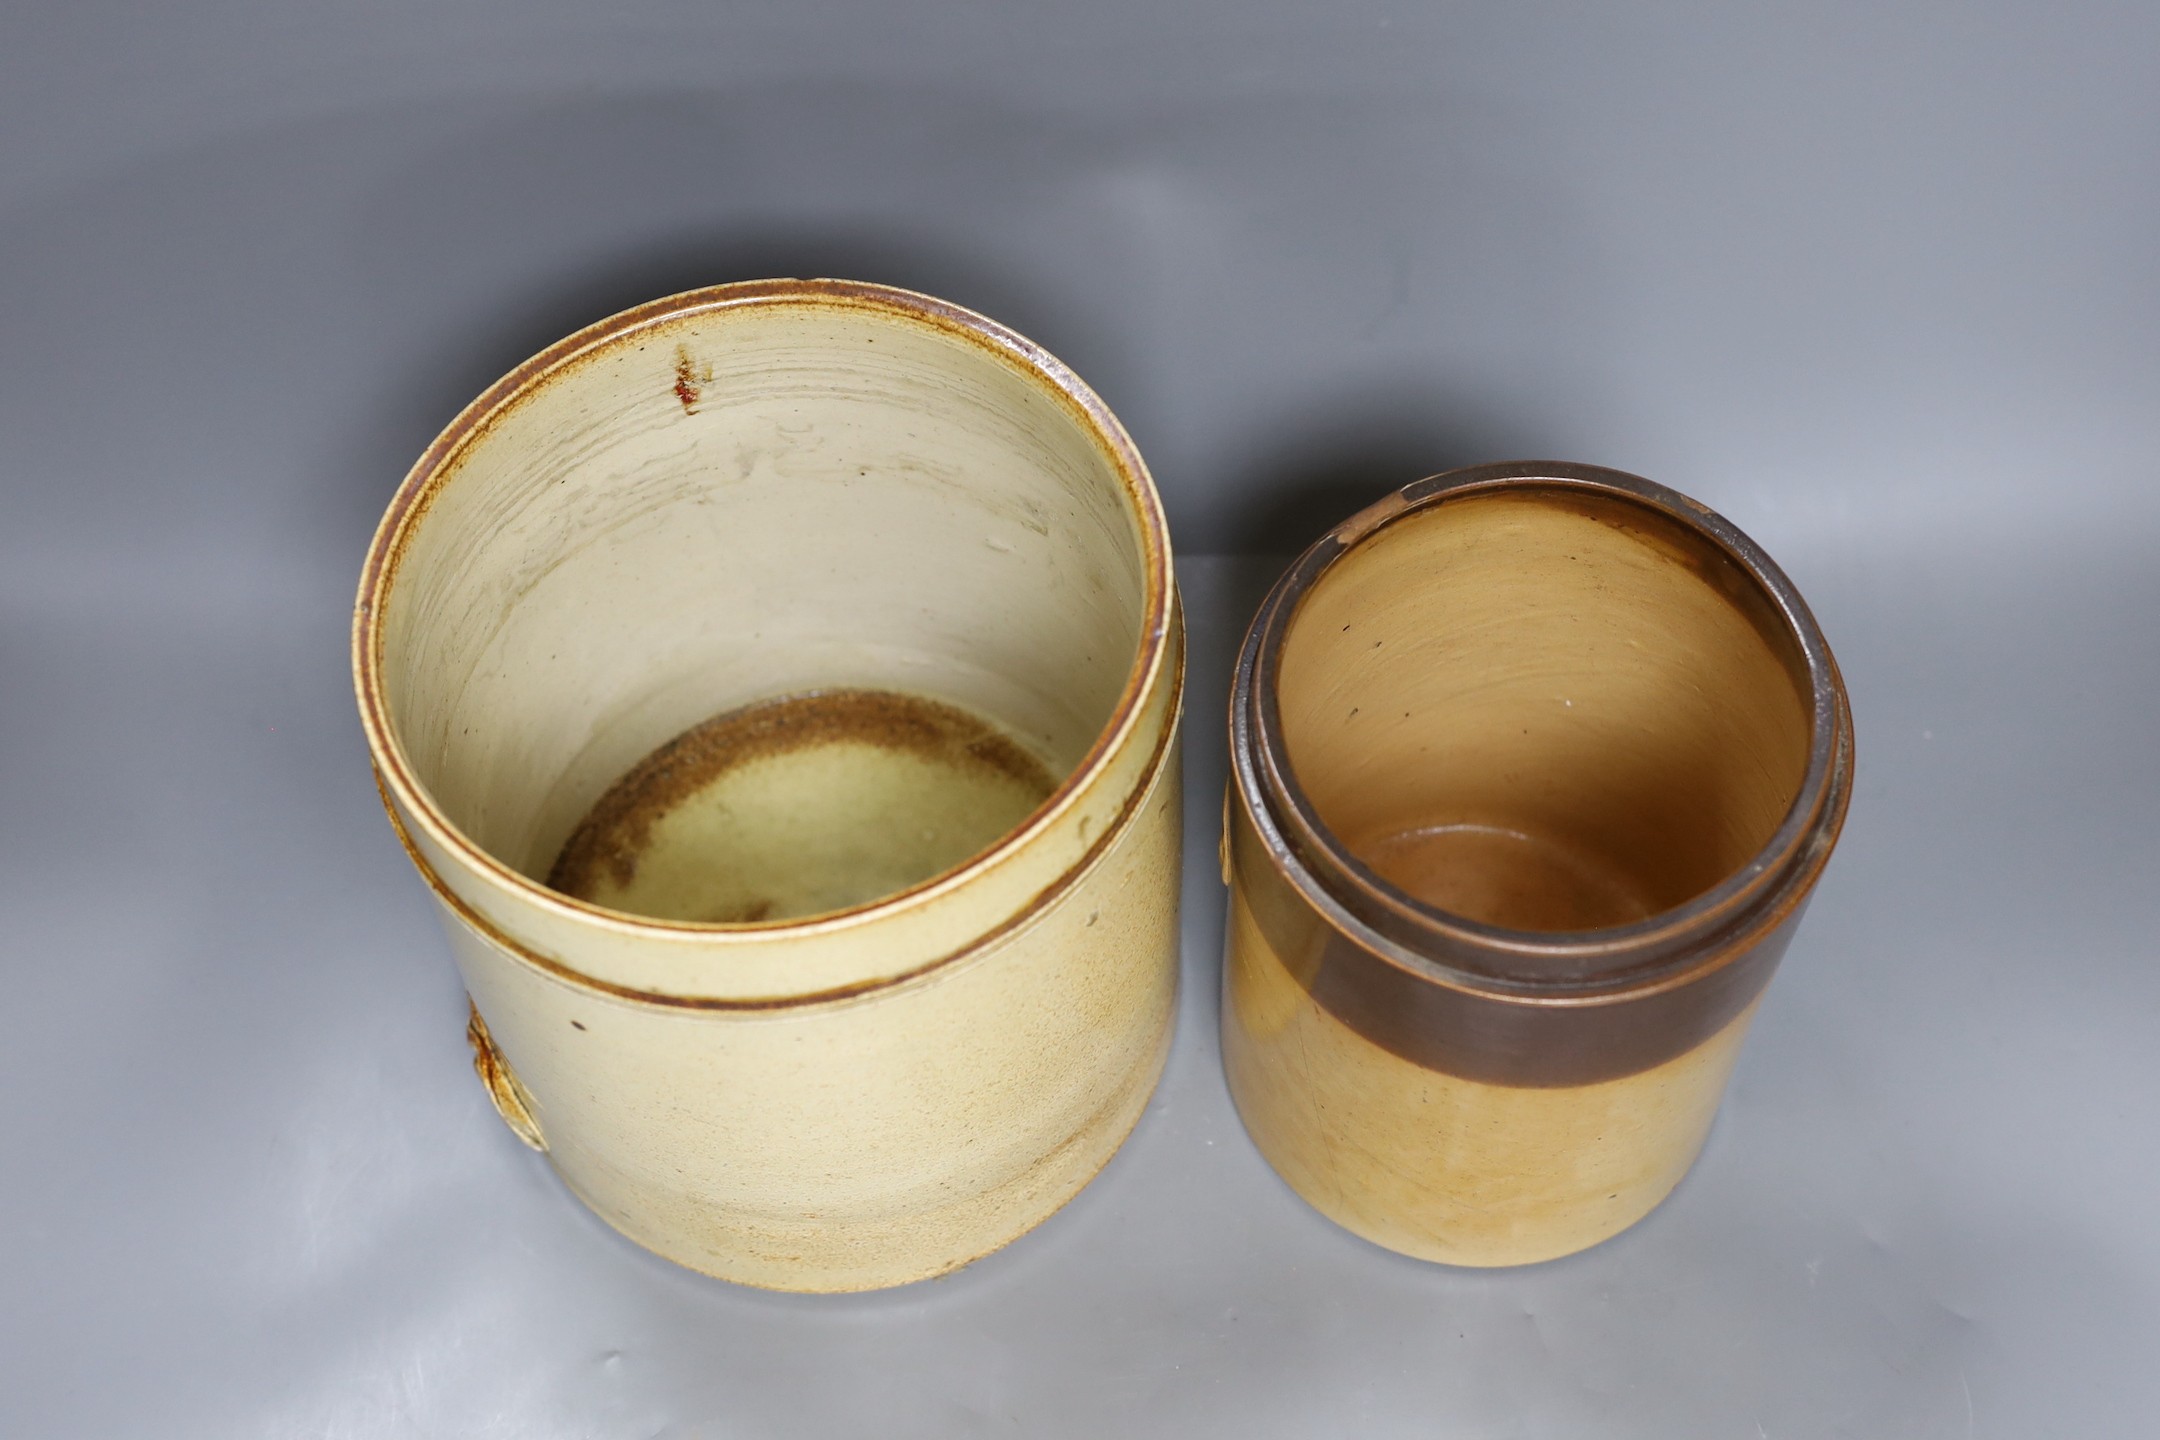 Two 19th century salt glazed stoneware cylindrical storage jars, both with Royal Coat of Arms sprigging, Tallest 20.5cm